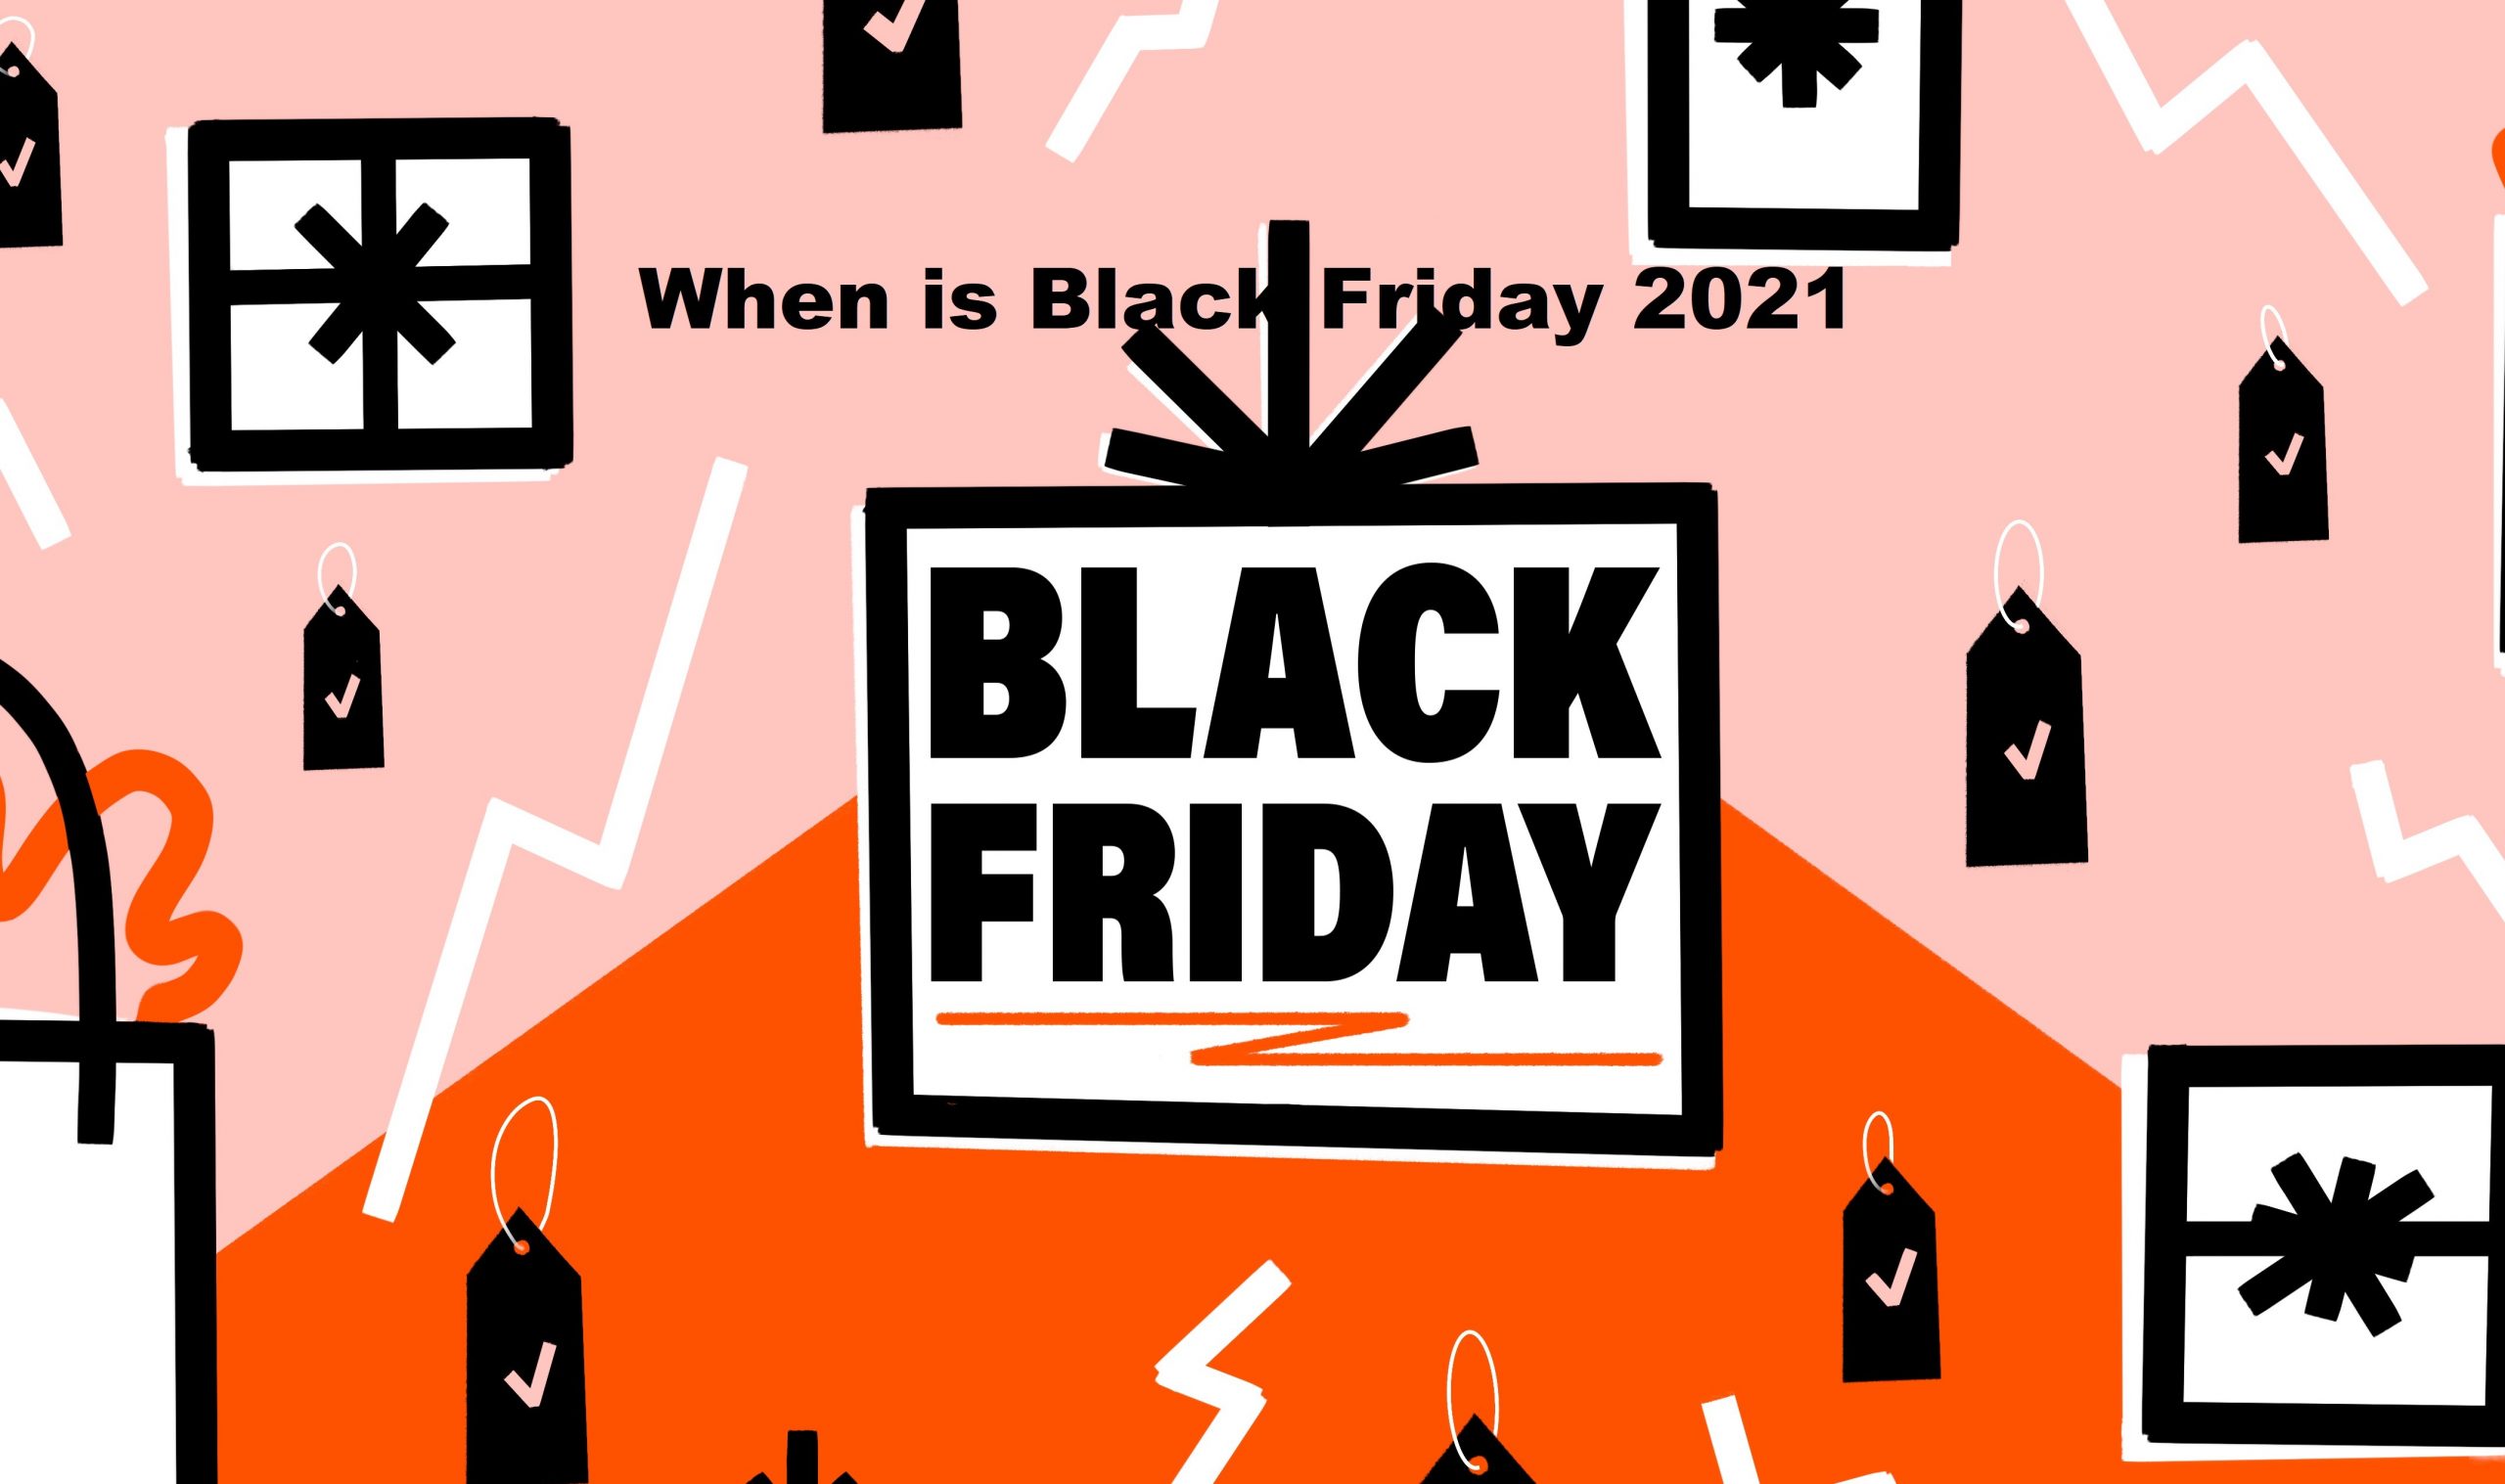 When is Black Friday 2021